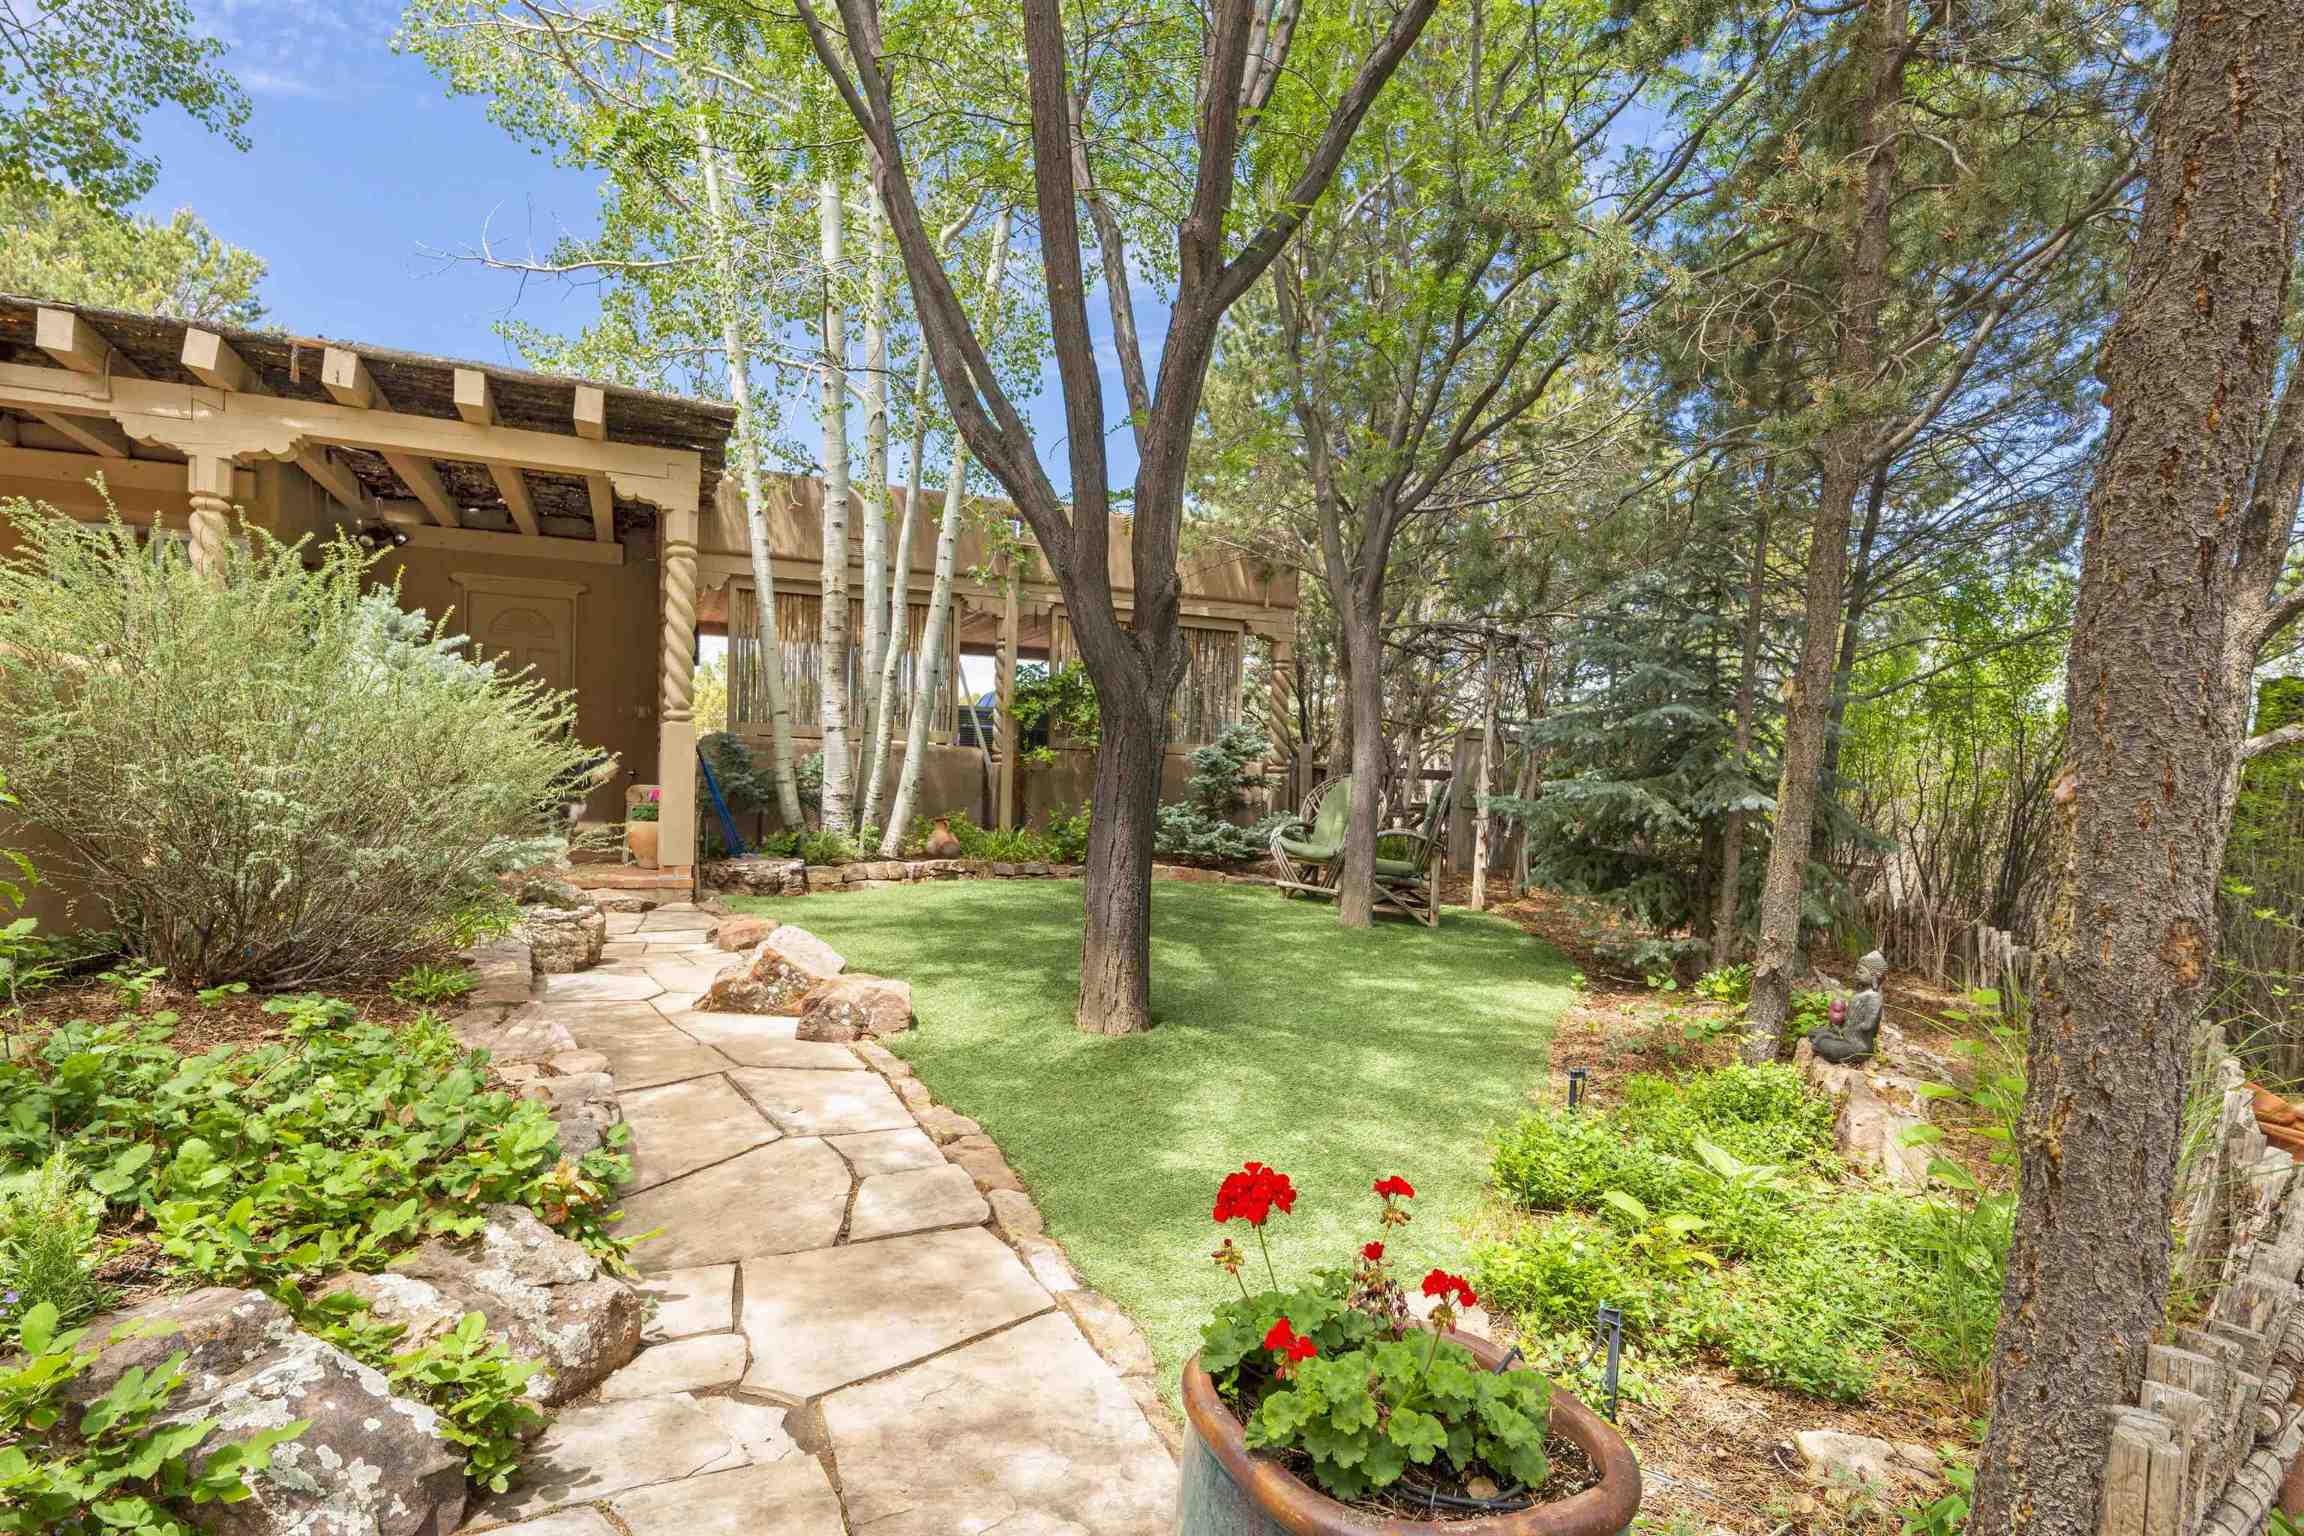 41-A Glowing Star, Santa Fe, New Mexico 87506, 3 Bedrooms Bedrooms, ,3 BathroomsBathrooms,Residential,For Sale,41-A Glowing Star,202104155